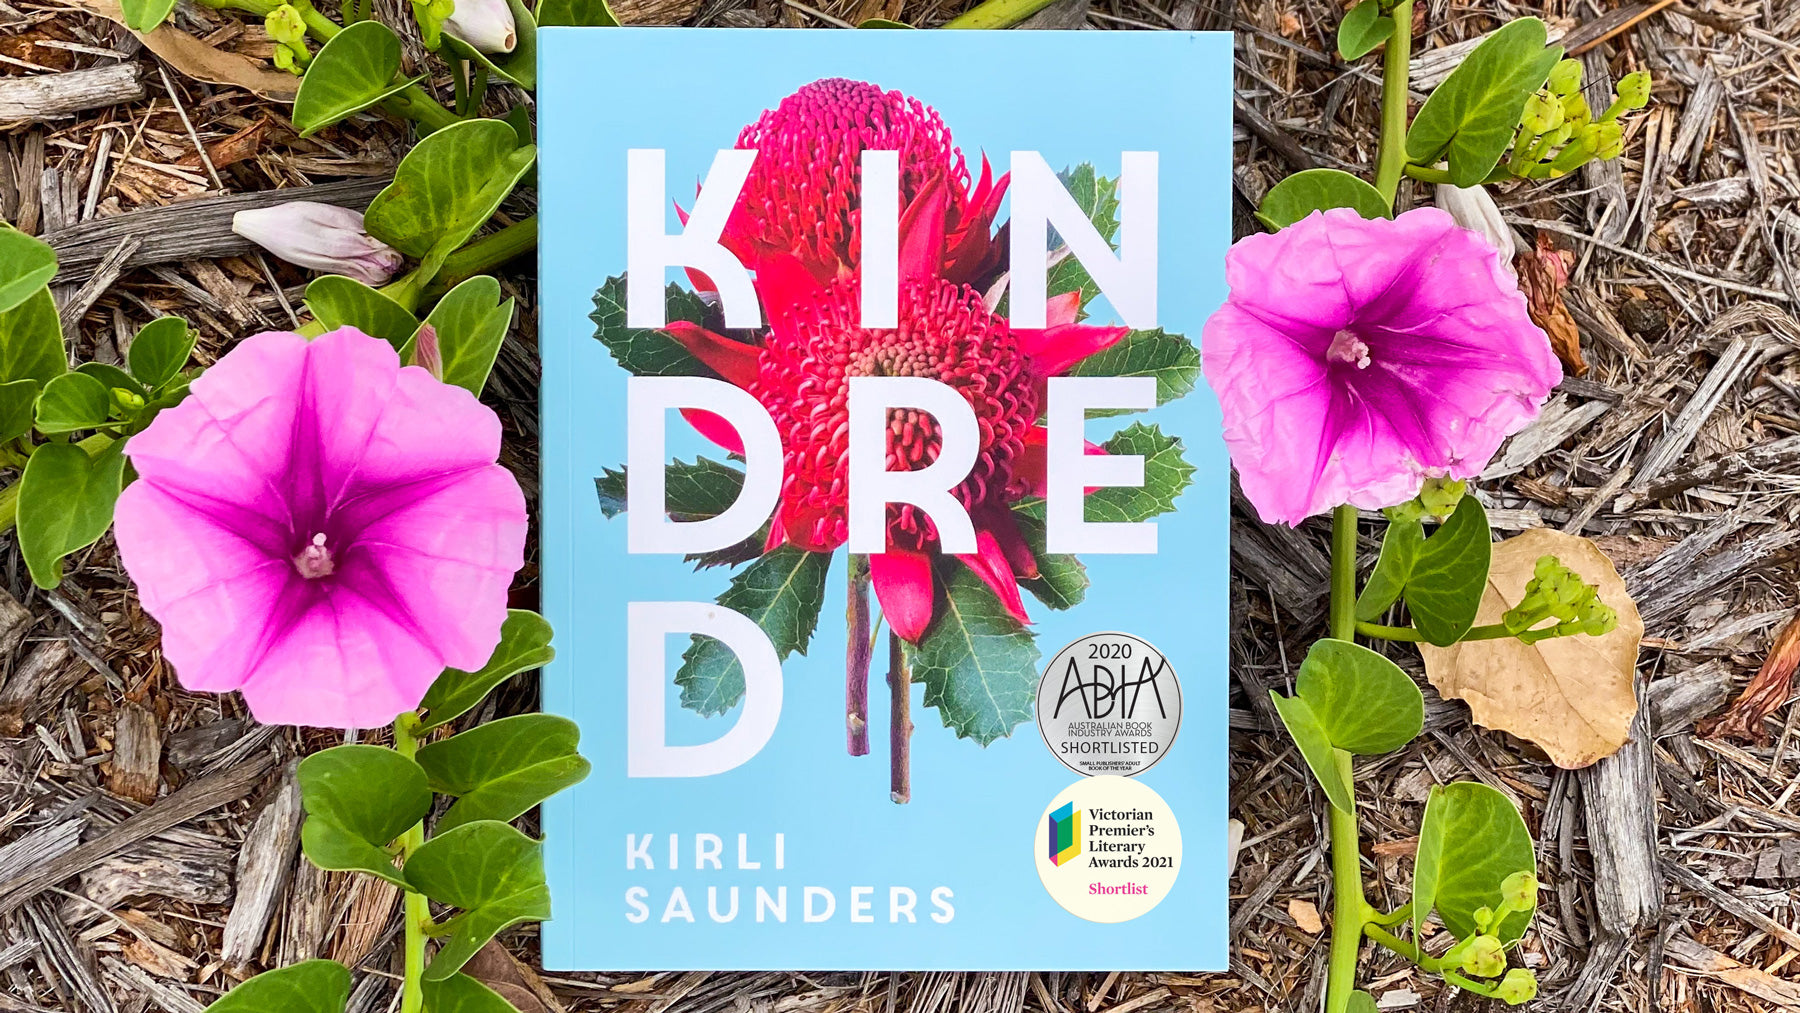 Kindred by Kirli Saunders shortlisted in the Victorian Premier’s Literary Awards 